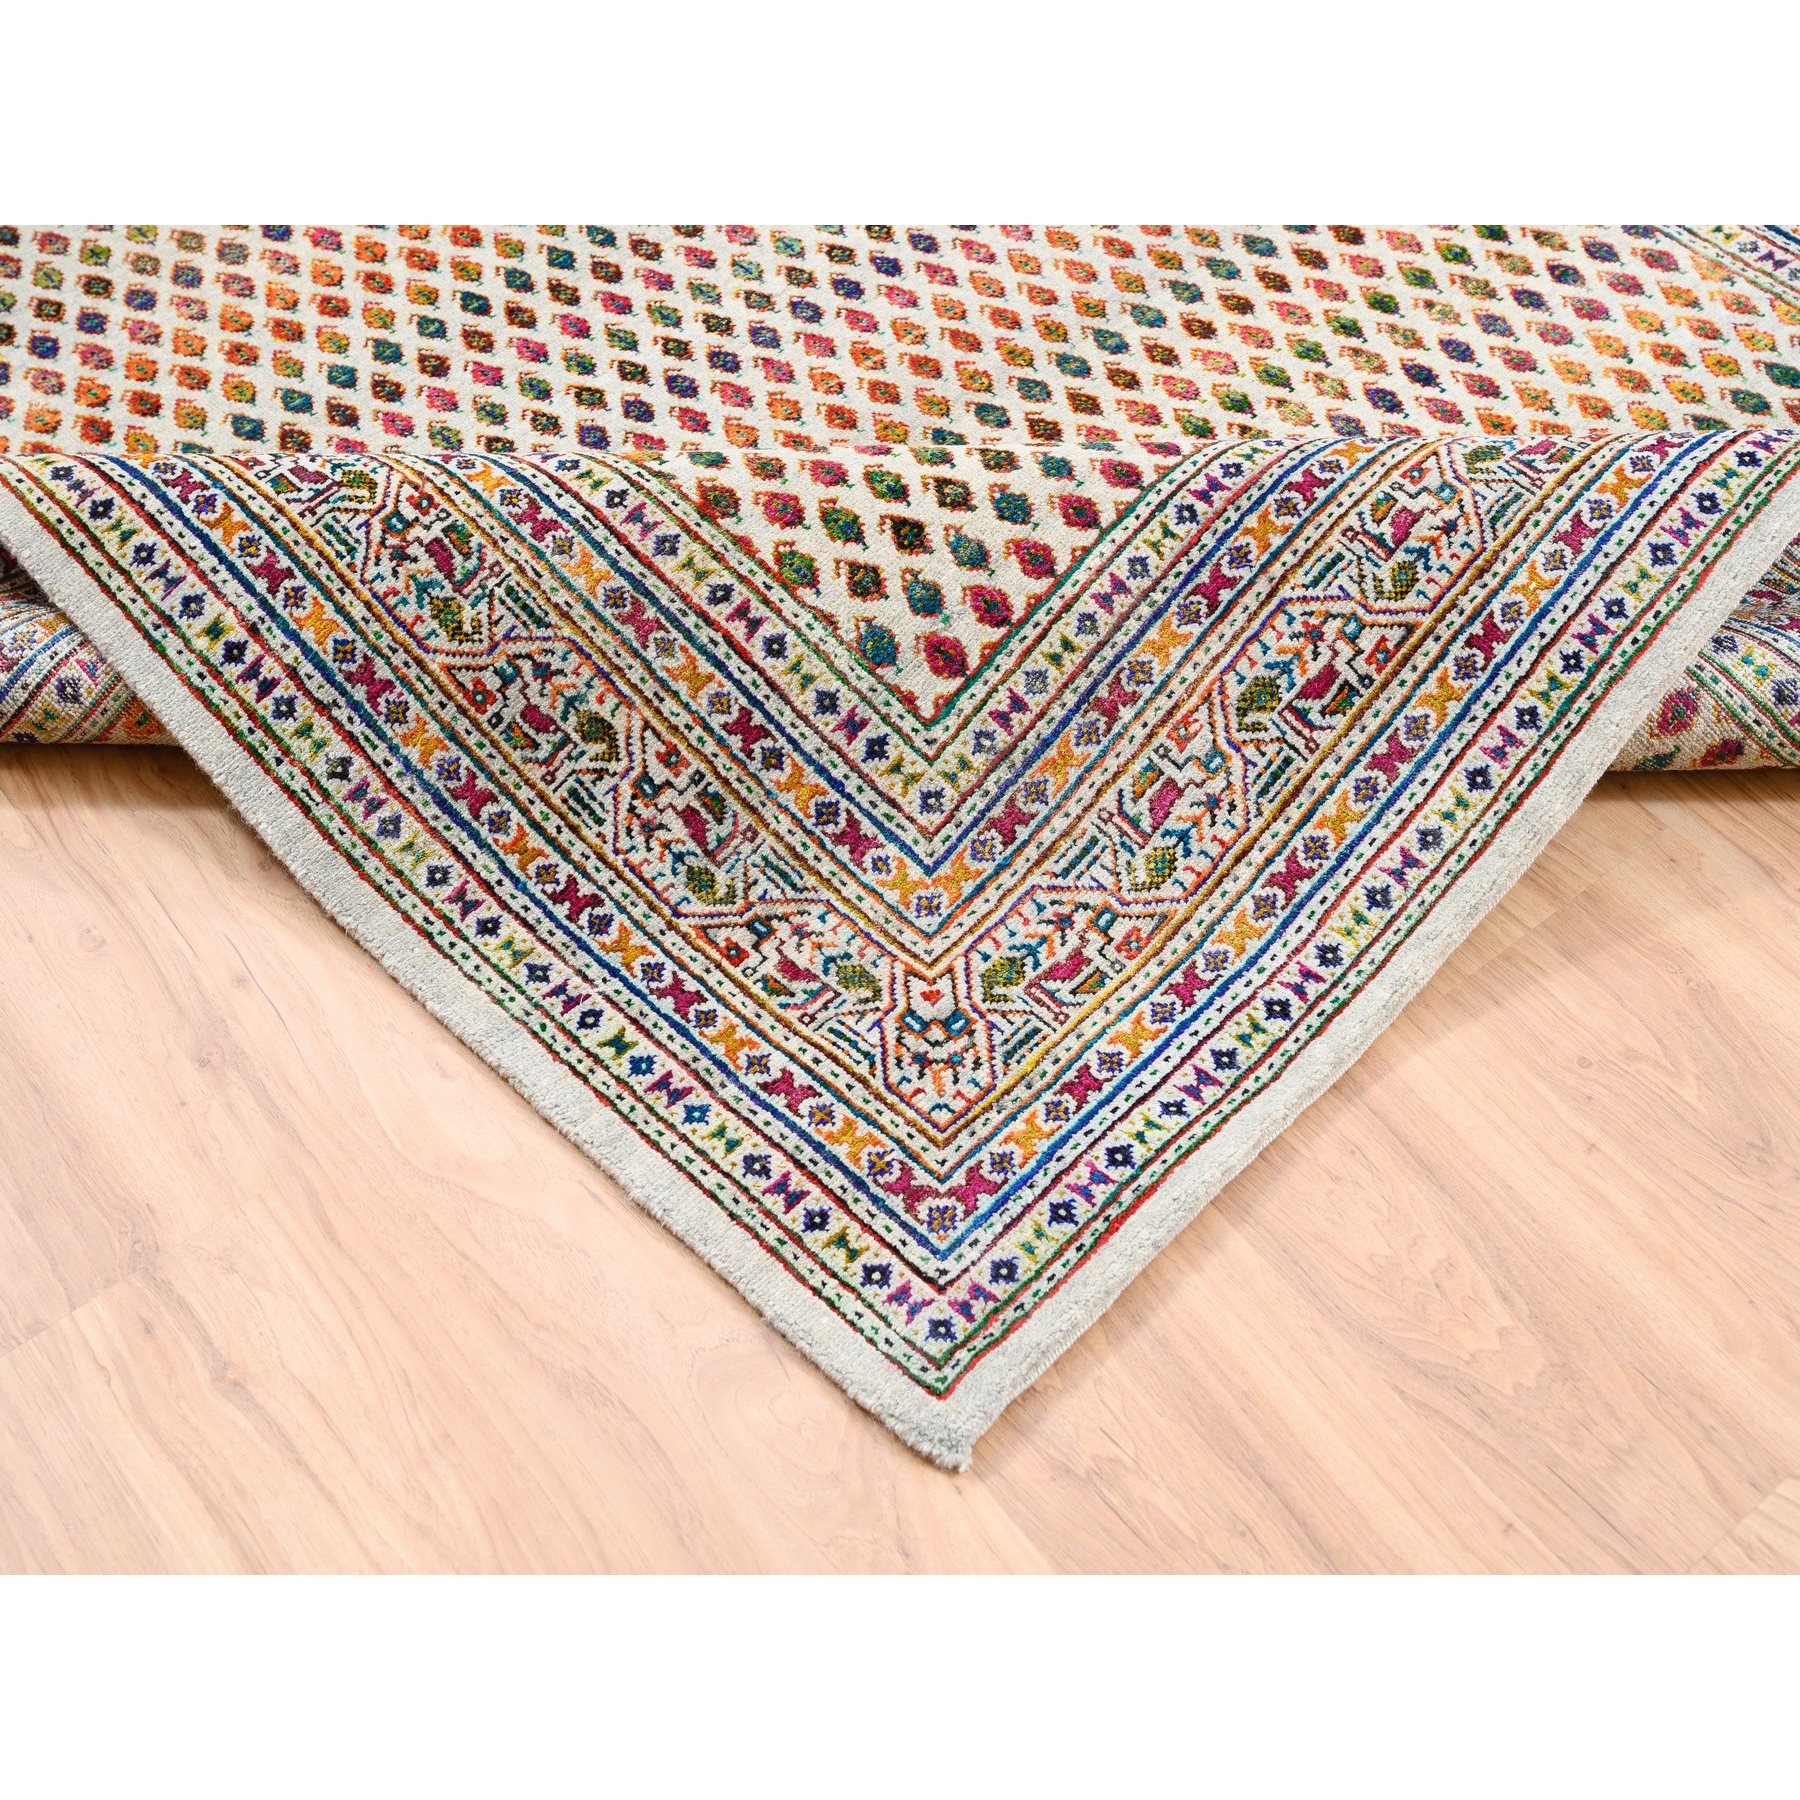 5'10"x9' Colorful Wool And Sari Silk Sarouk Mir Inspired With Repetitive Boteh Design Hand Woven Oriental Rug 